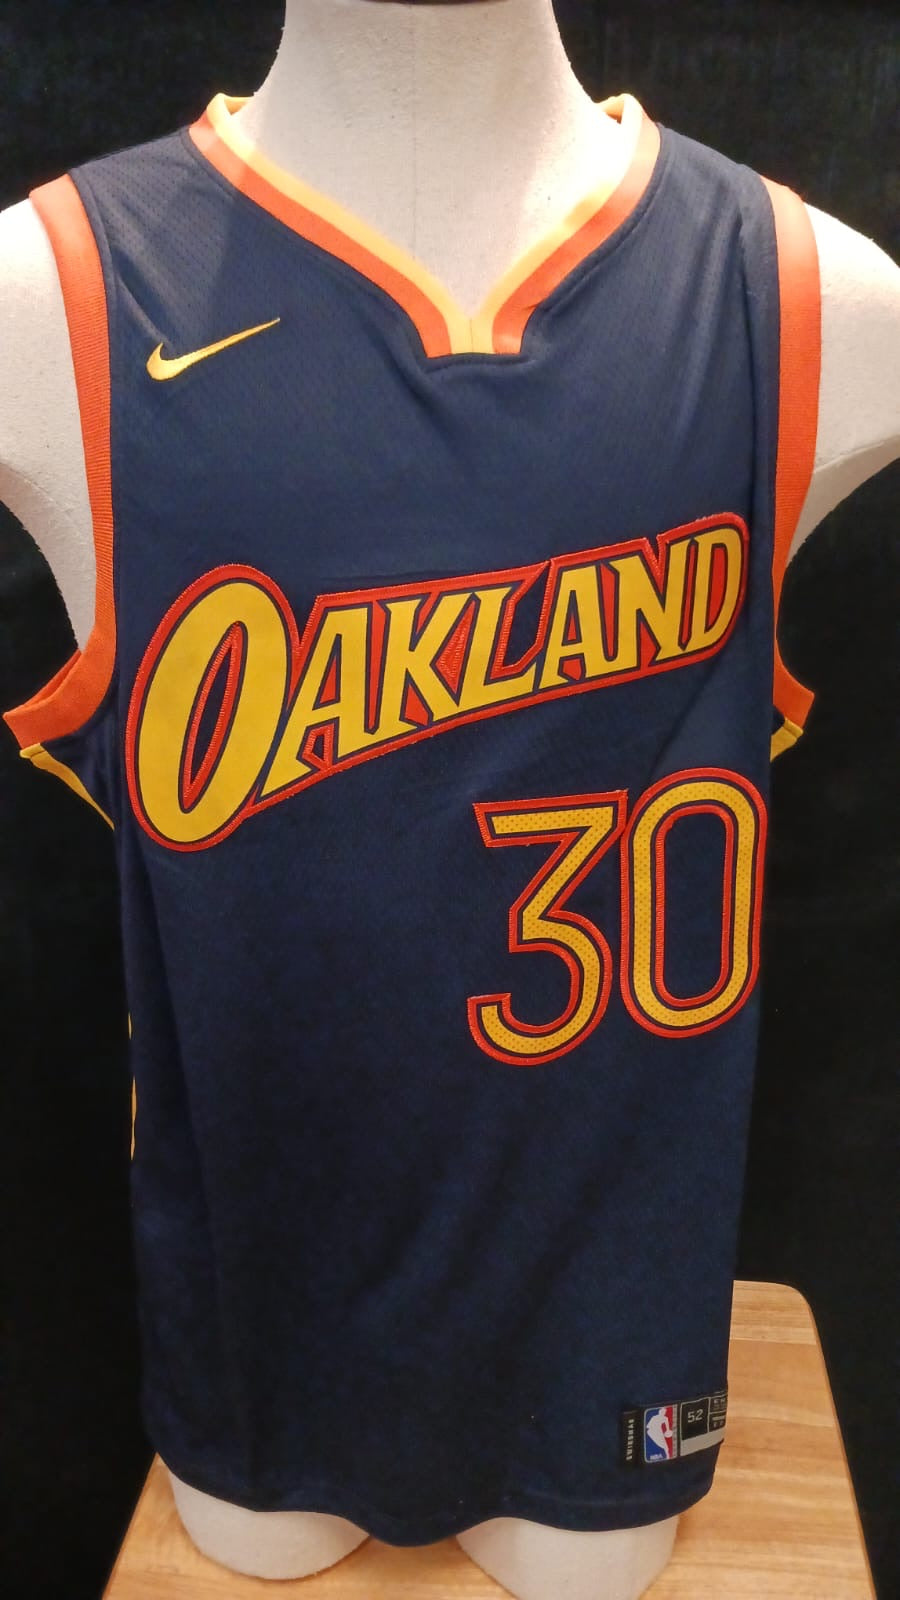 stephen curry's jersey